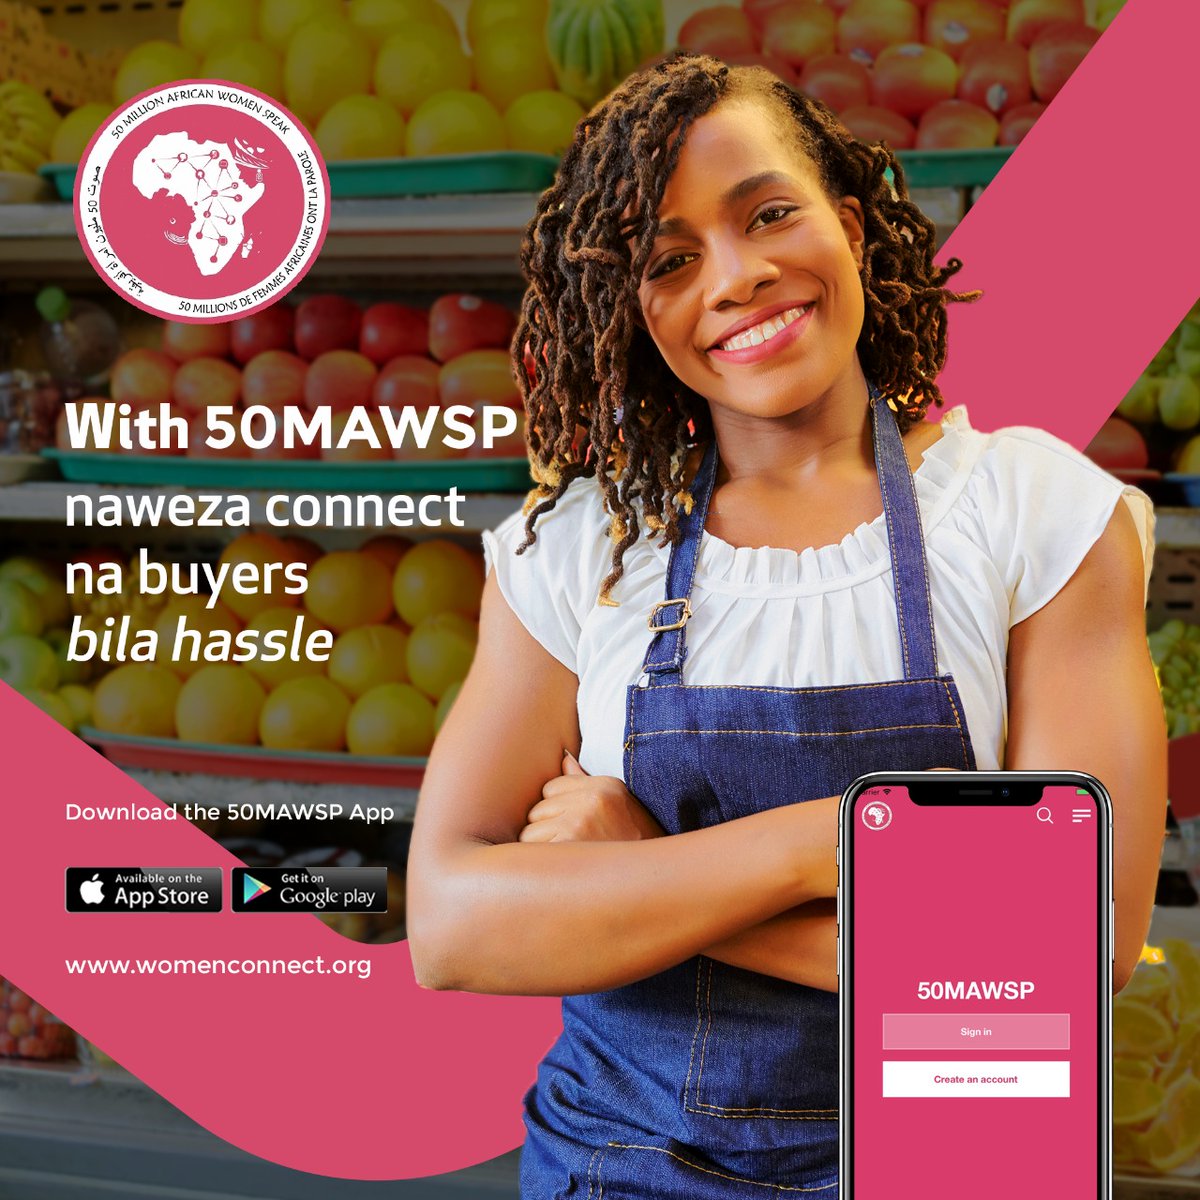 Are you a business woman in Kenya, looking for a market gap and meet buyers? Join the movement. 50MAWSP app is the solution for you. Download the 50MAWSP app on Google Play Store or Apple App Store today. @PSYGKenya @igadsecretariat @AfDB_Group @comesa_lusaka @jumuiya @50_eac